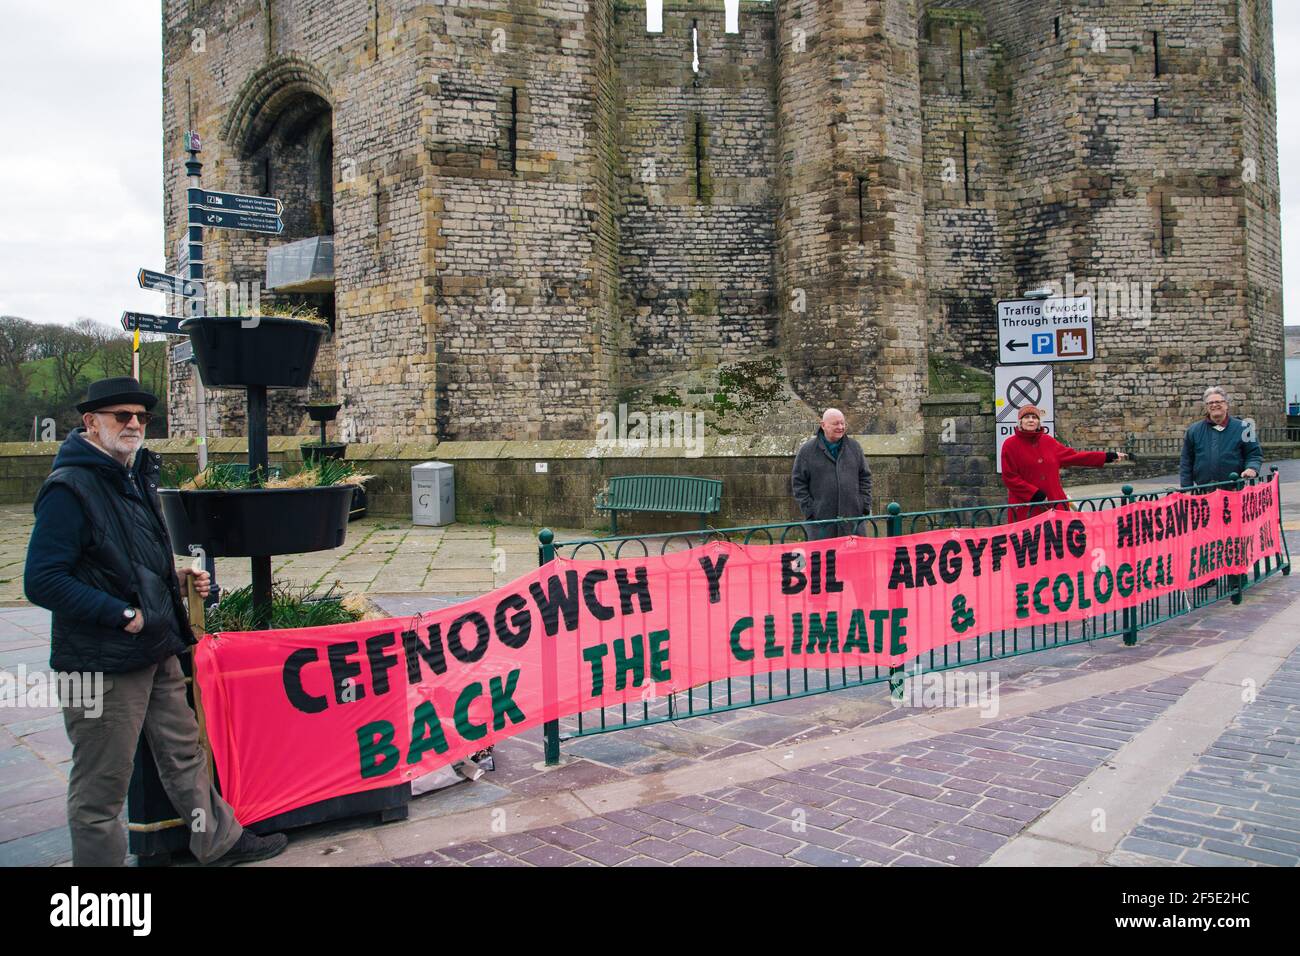 Caernarfon, Gwynedd, North Wales, UK. 26th March 2021. Members of Extinction Rebellion North Wales joined by Plaid Cymru MP Hywel Williams hold a banner calling for the backing of the Climate and Ecological Emergency bill outside Caernarfon Castleas part of a national banner drop day of action.Parliament declared a Climate Emergency back in 2019 – but protestors say actions haven’t matched their words. An emergency requires strong, decisive action to reverse the climate and ecological crisis. Stock Photo